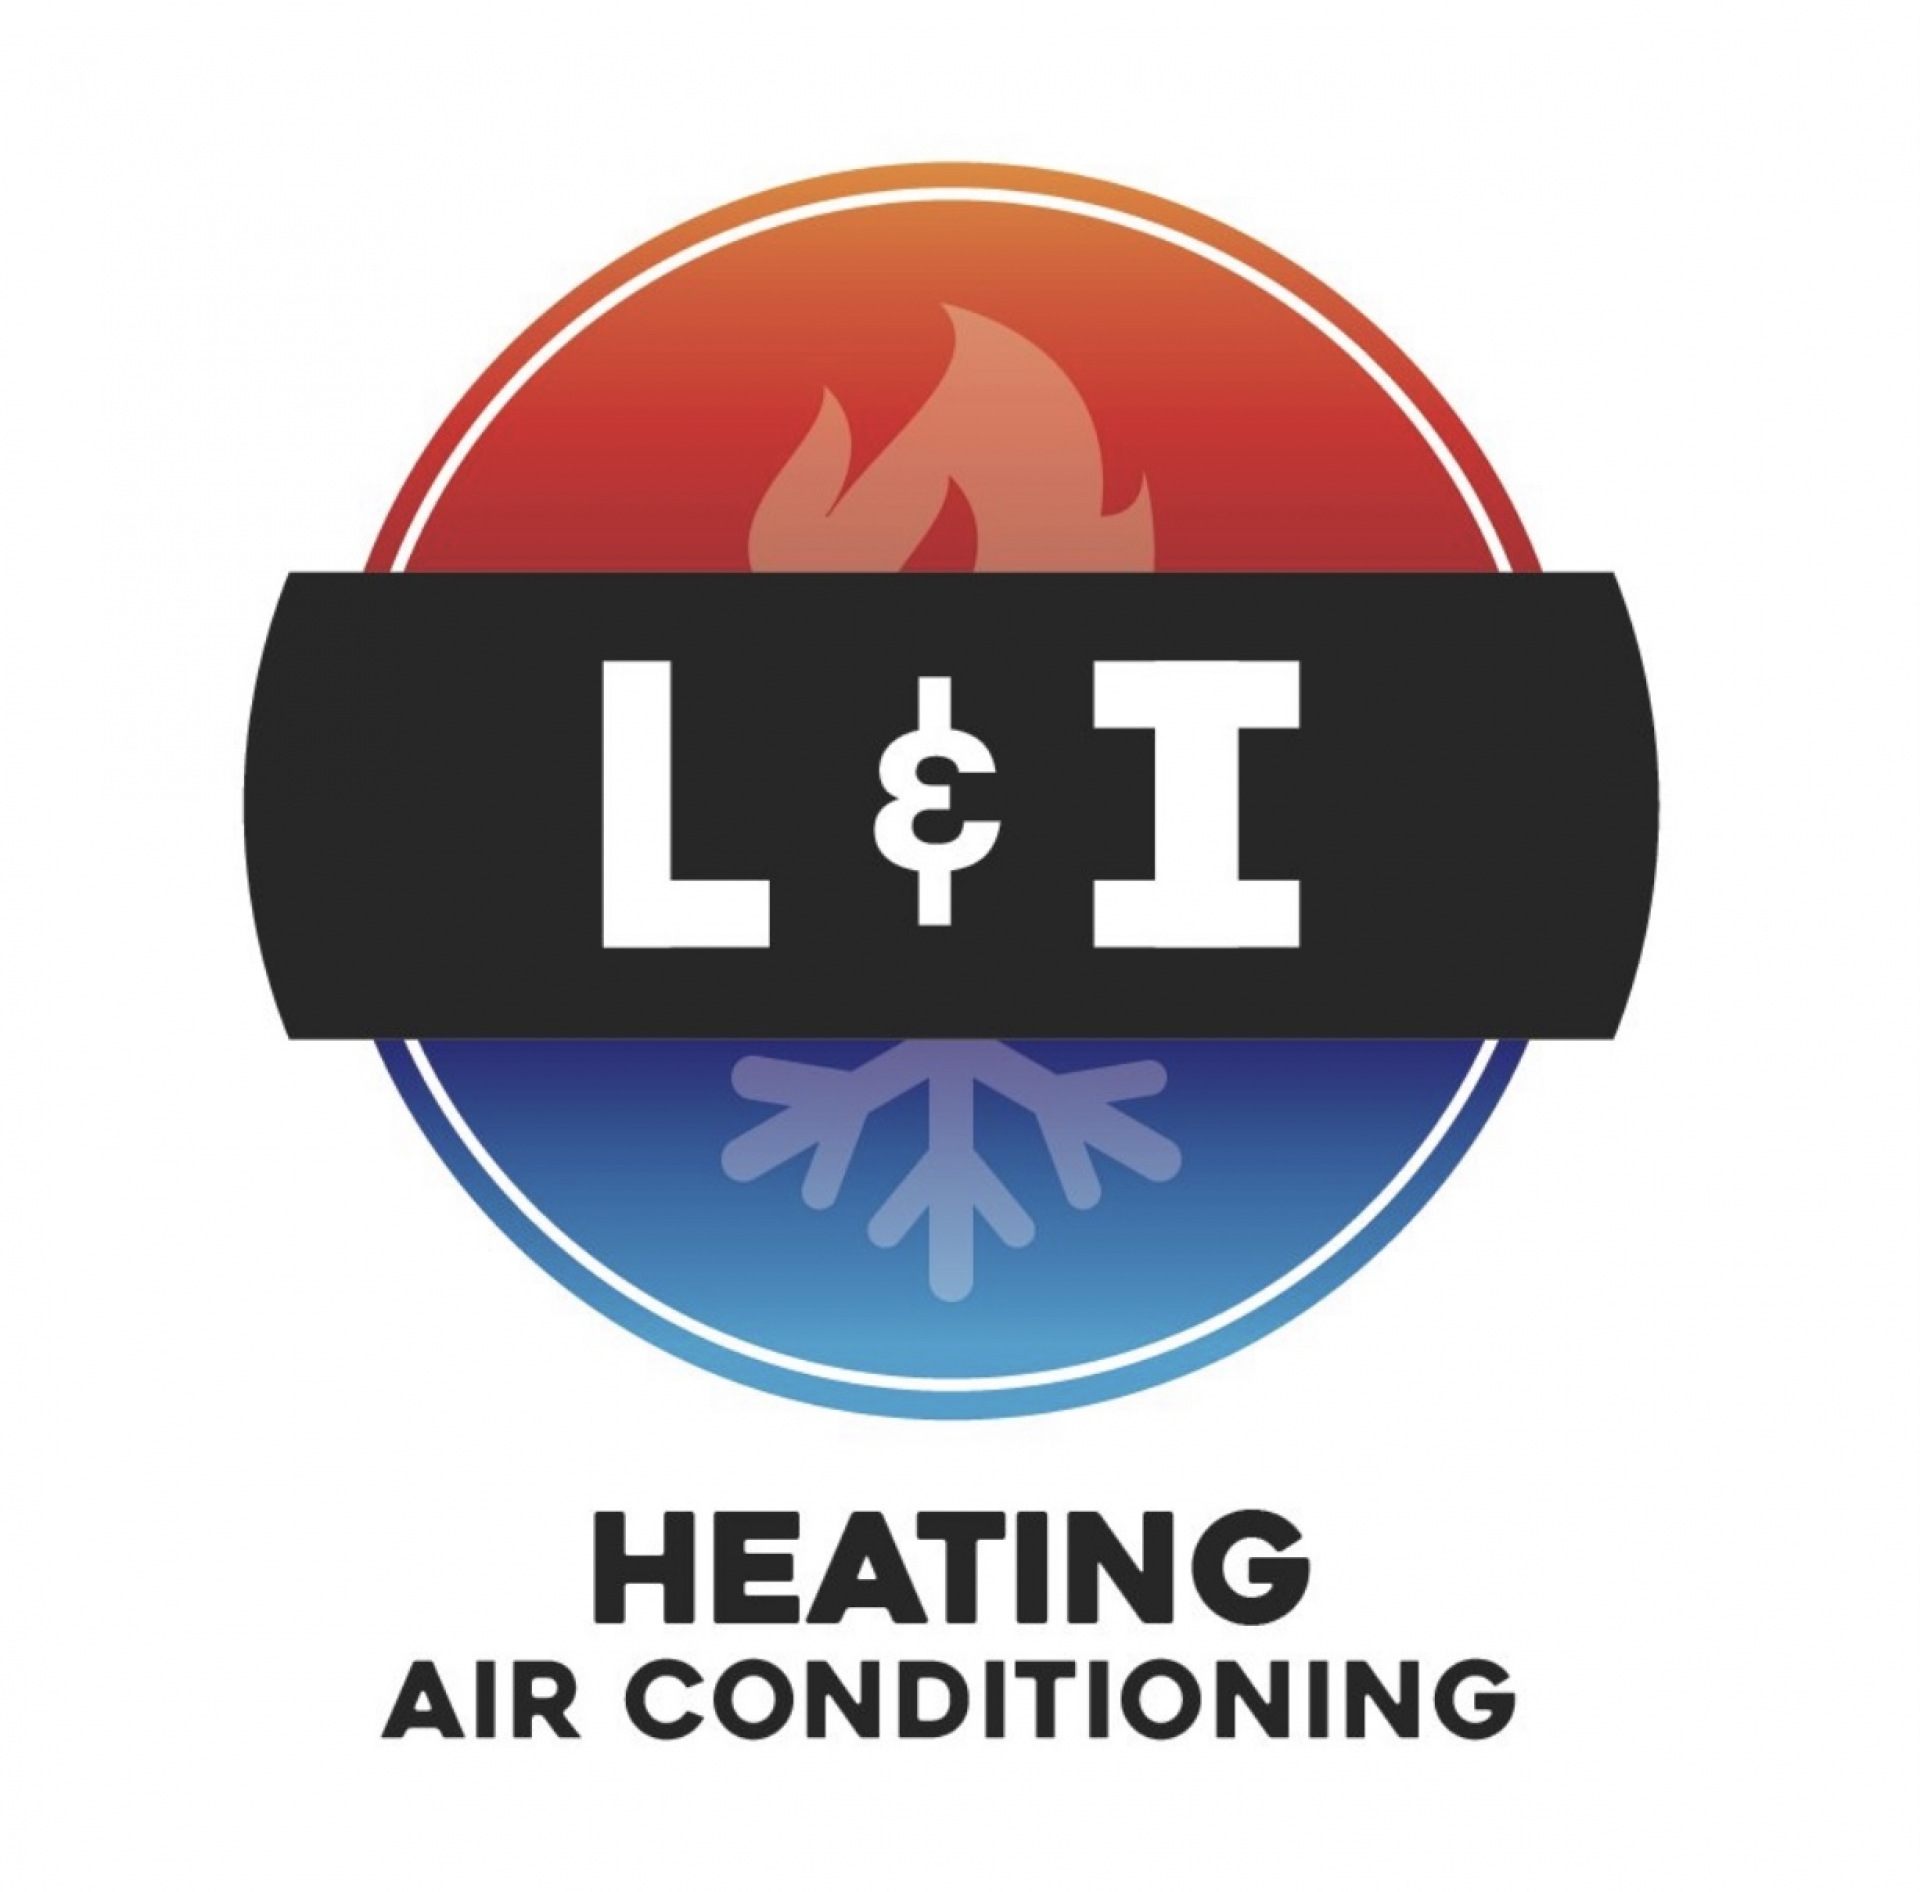 L&I Heating and Air Conditioning Inc logo